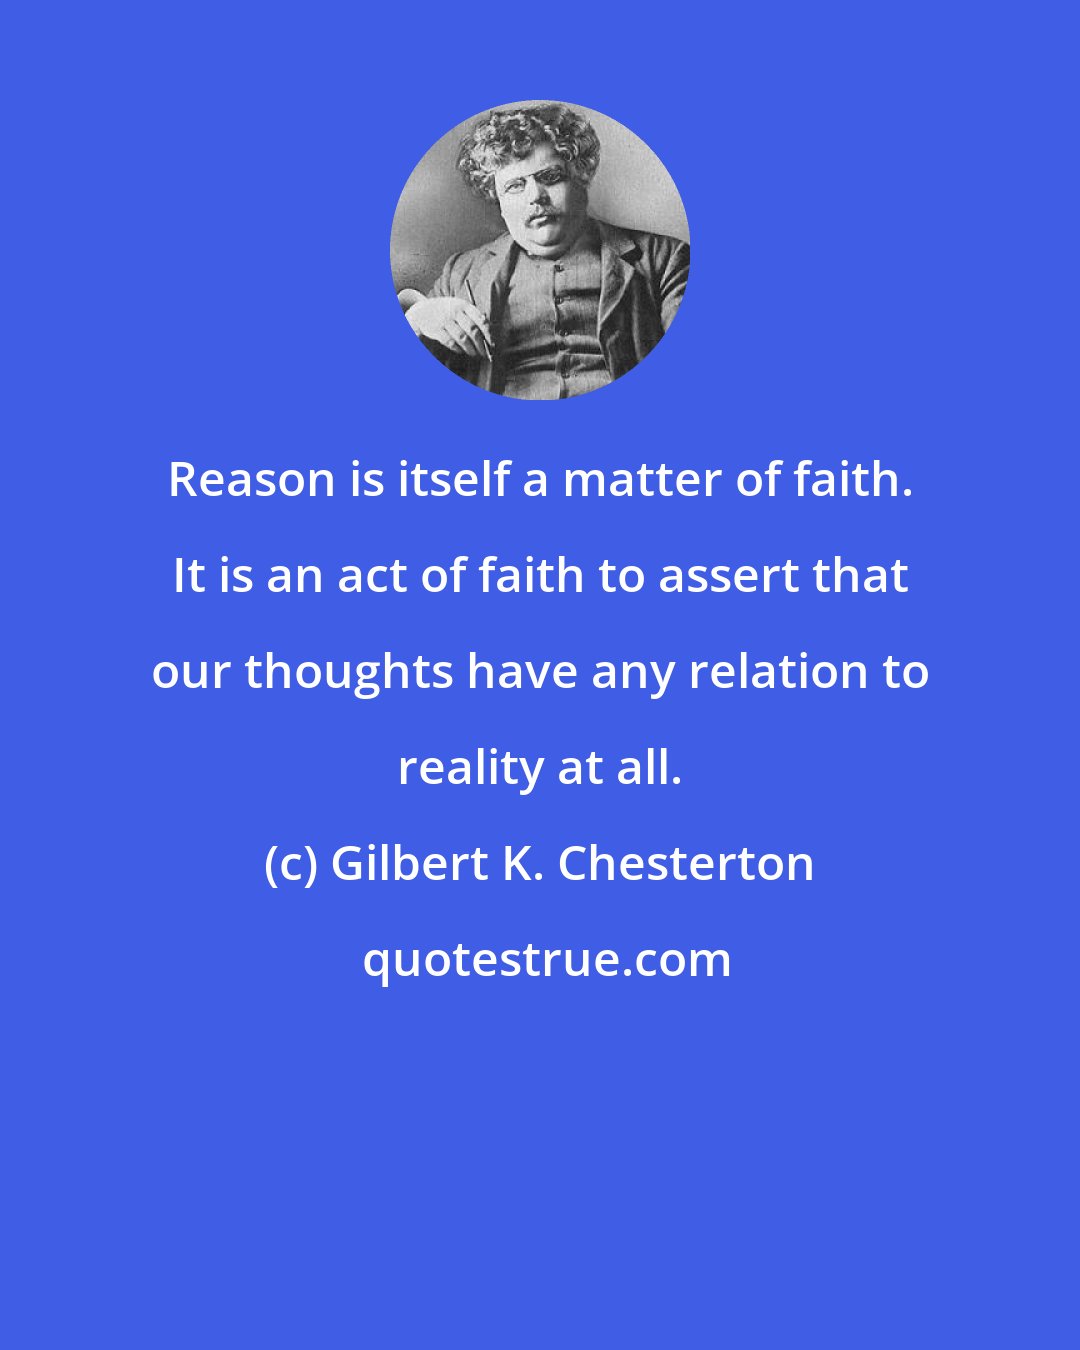 Gilbert K. Chesterton: Reason is itself a matter of faith. It is an act of faith to assert that our thoughts have any relation to reality at all.